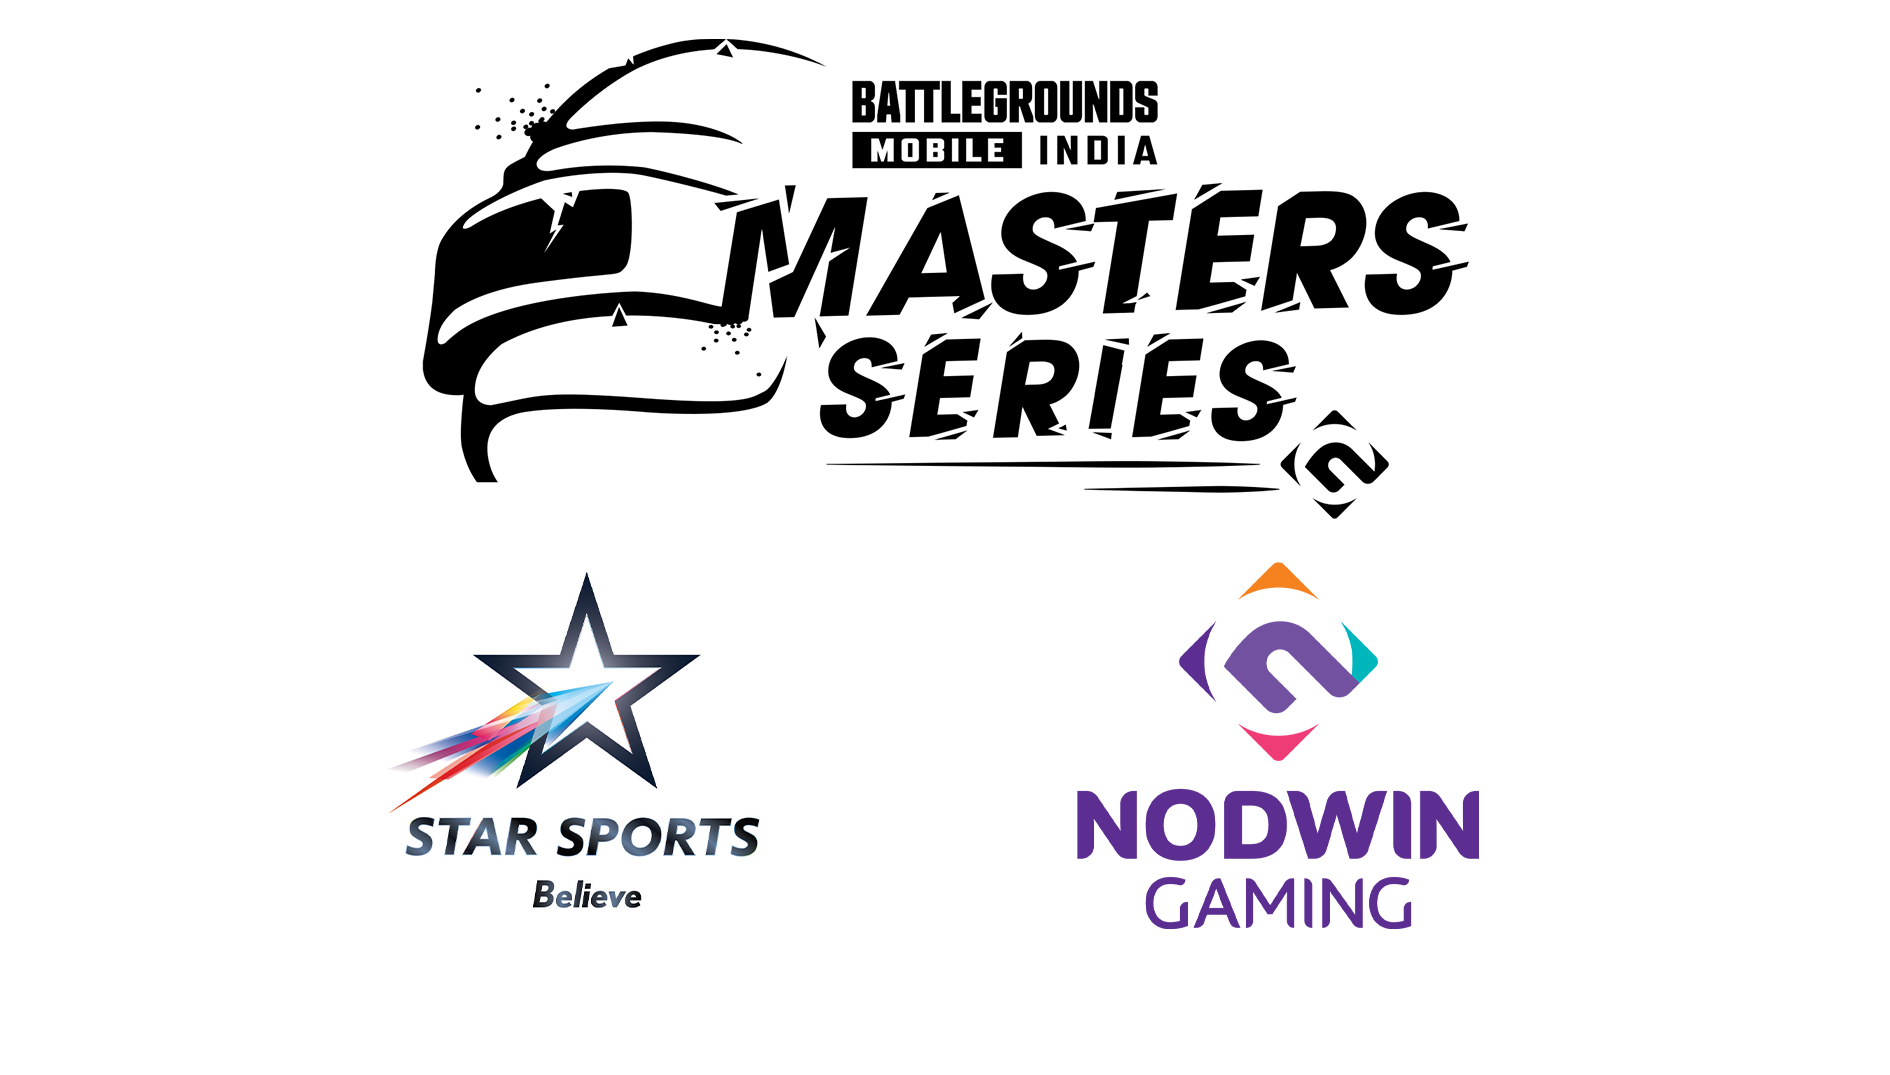 NODWIN Gaming collaborates with Star Sports to broadcast BGMI tournament